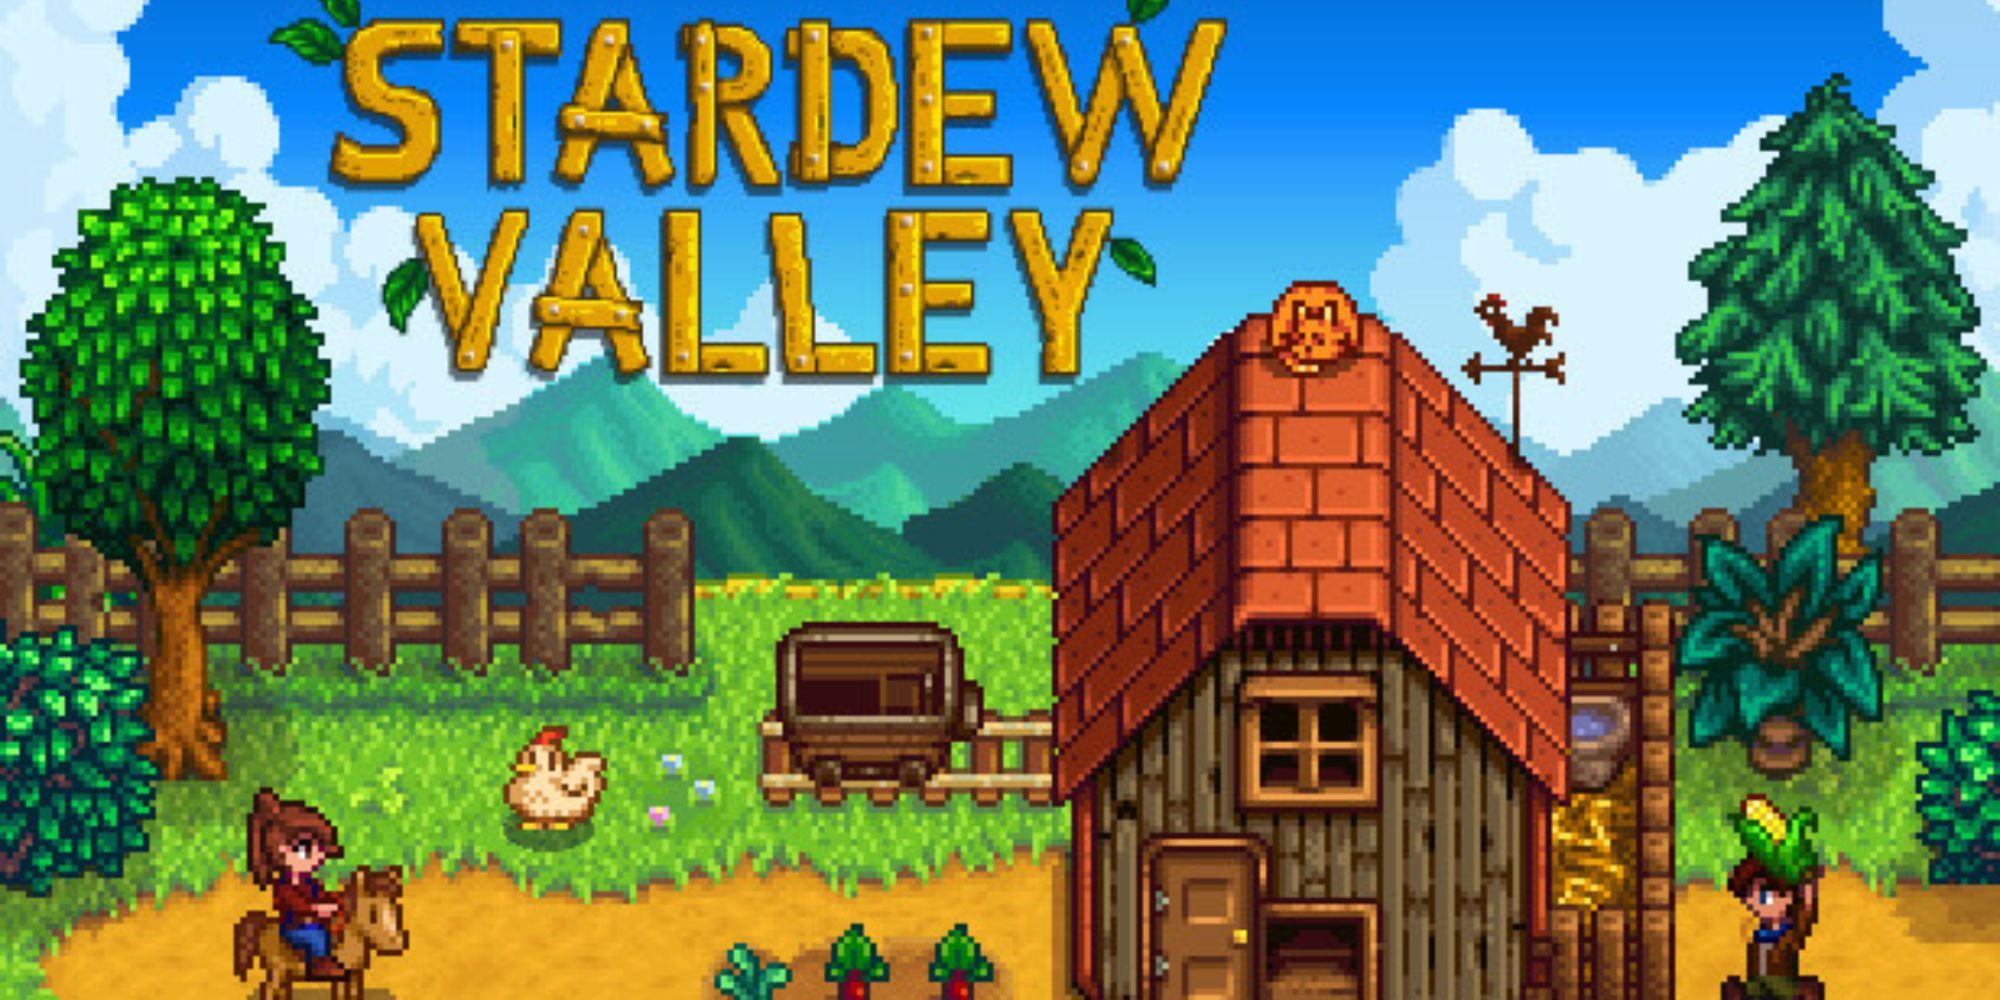 A character on a horse outside a barn in Stardew Valley, with logo.